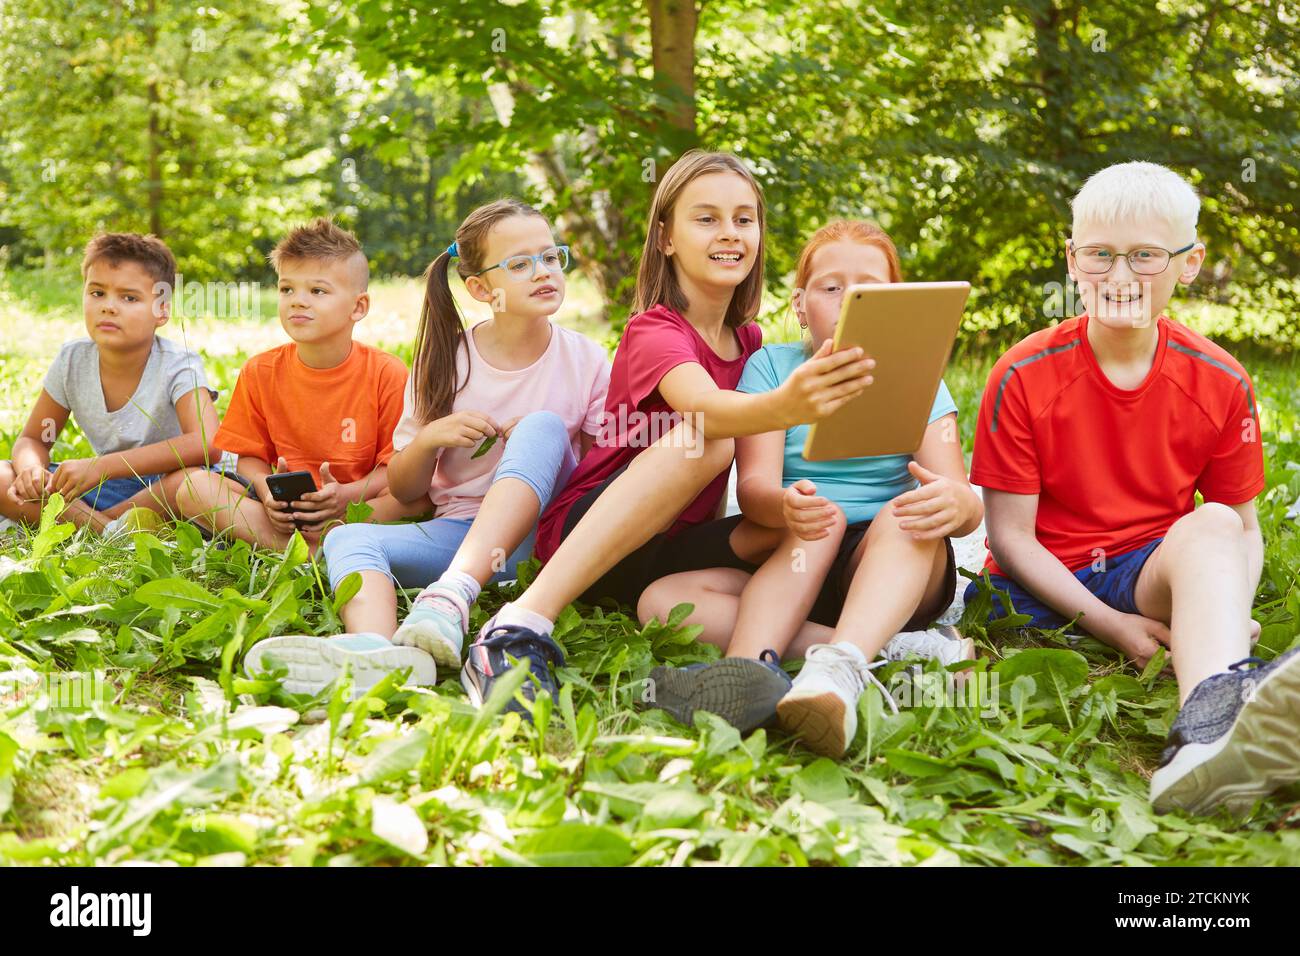 Smiling girl holding tablet PC while sitting with friends on grass at park Stock Photo